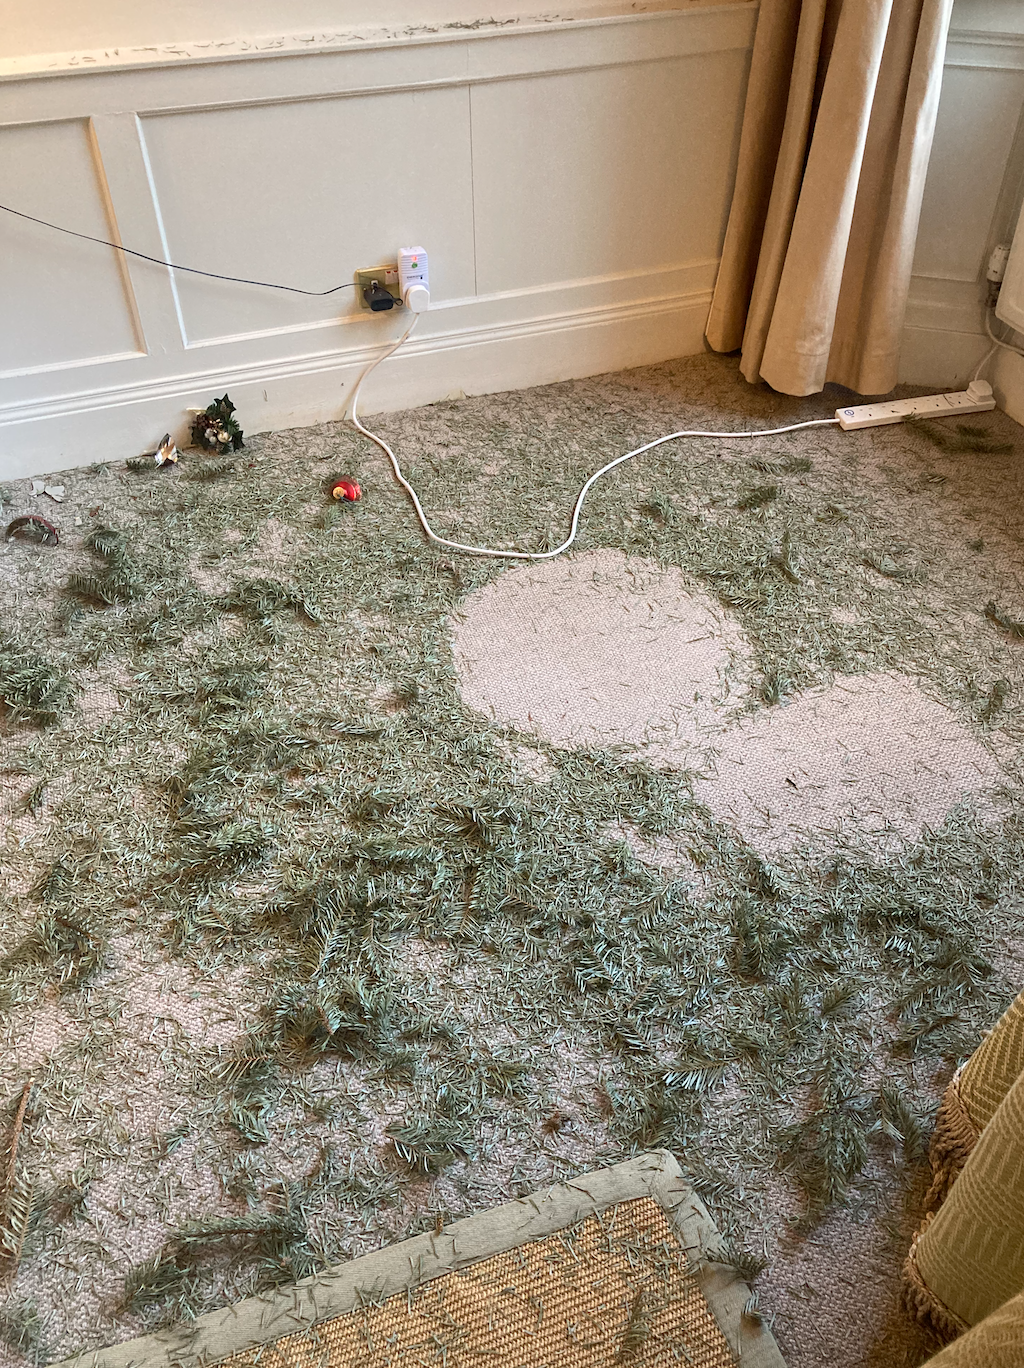 My Sitting Room carpet completely covered in needles!